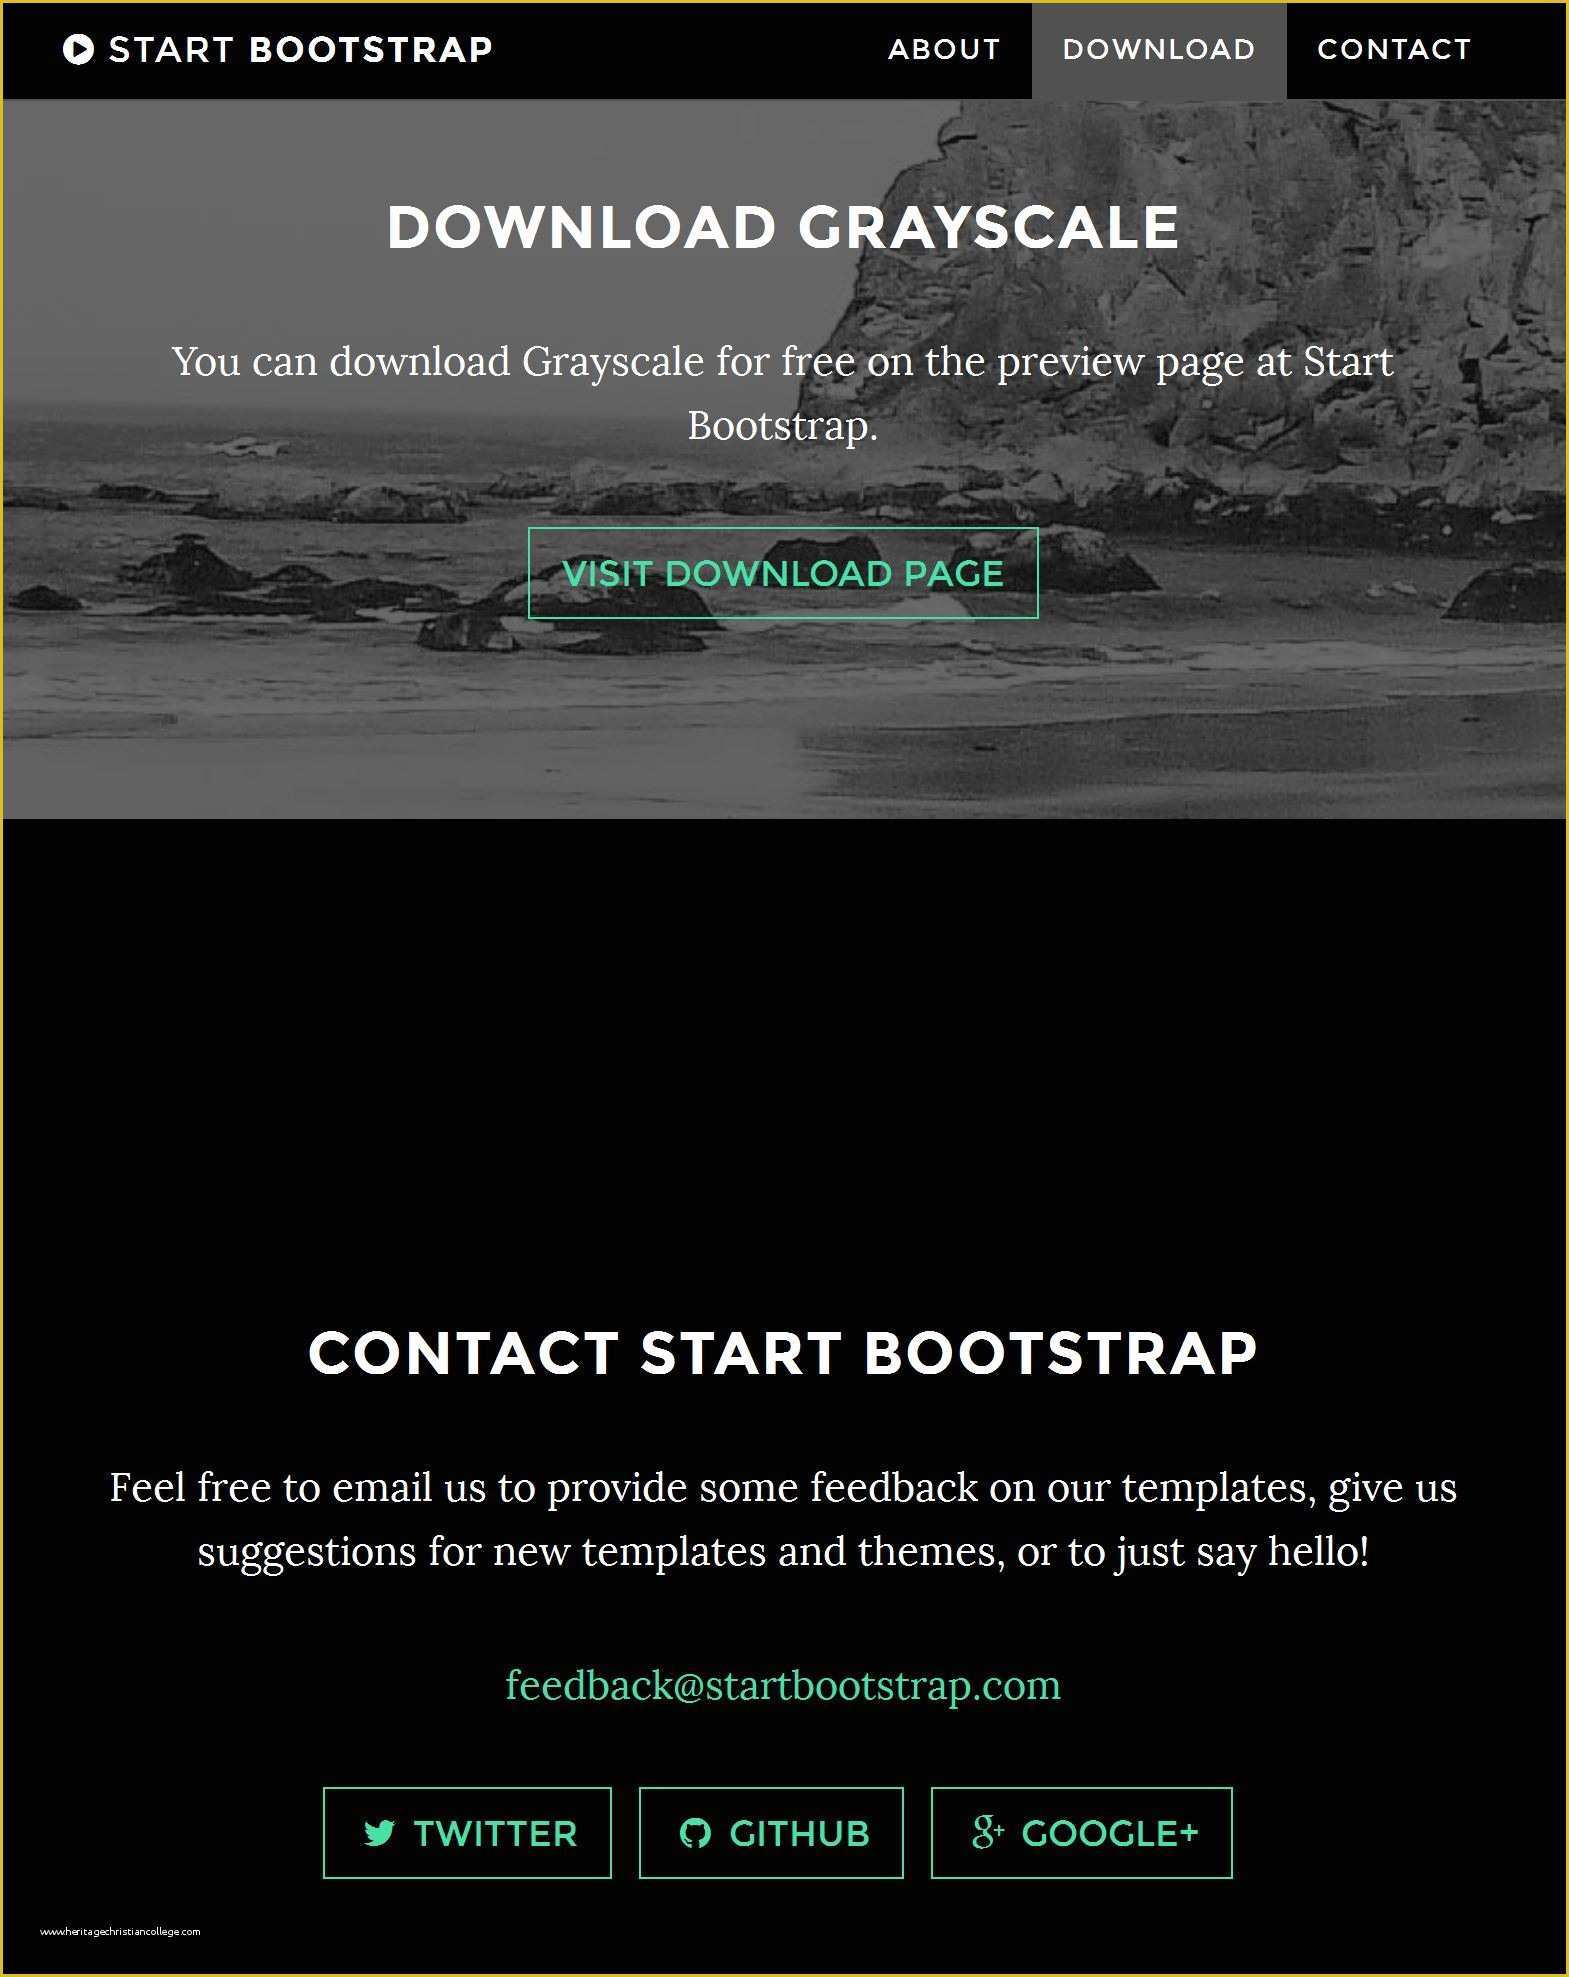 Free Bootstrap Templates 2017 Of 35 top Free Bootstrap Templates 2017